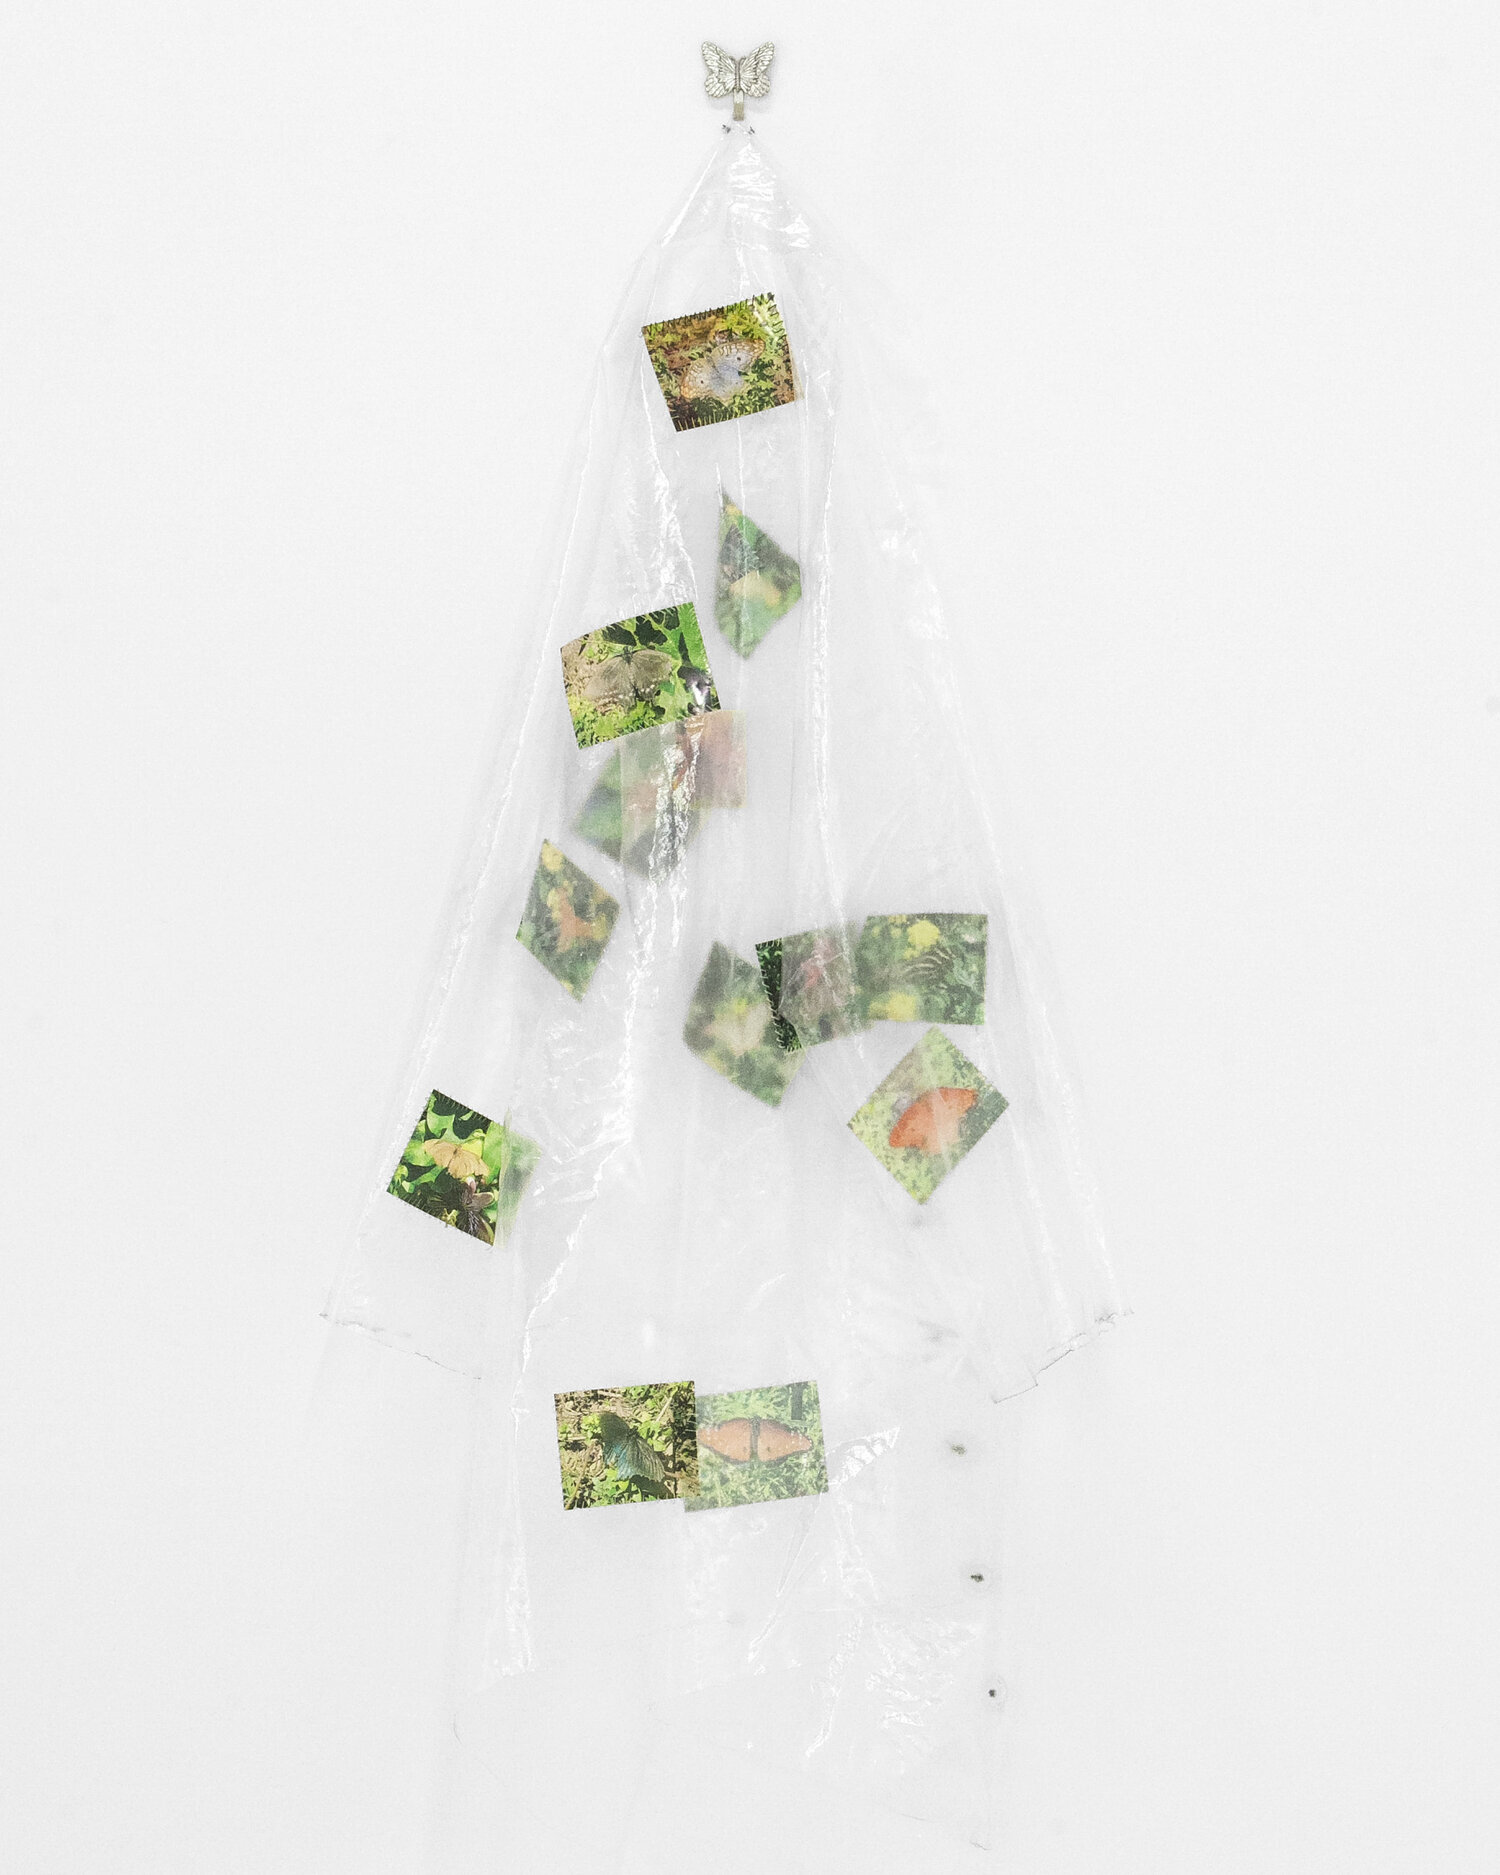  Butterfly Trench, 2019   PVA Plastic, Inkjet Print on Transparency Film, Embroidery Thread, Buttons, Pewter   16x48” (Variable) 